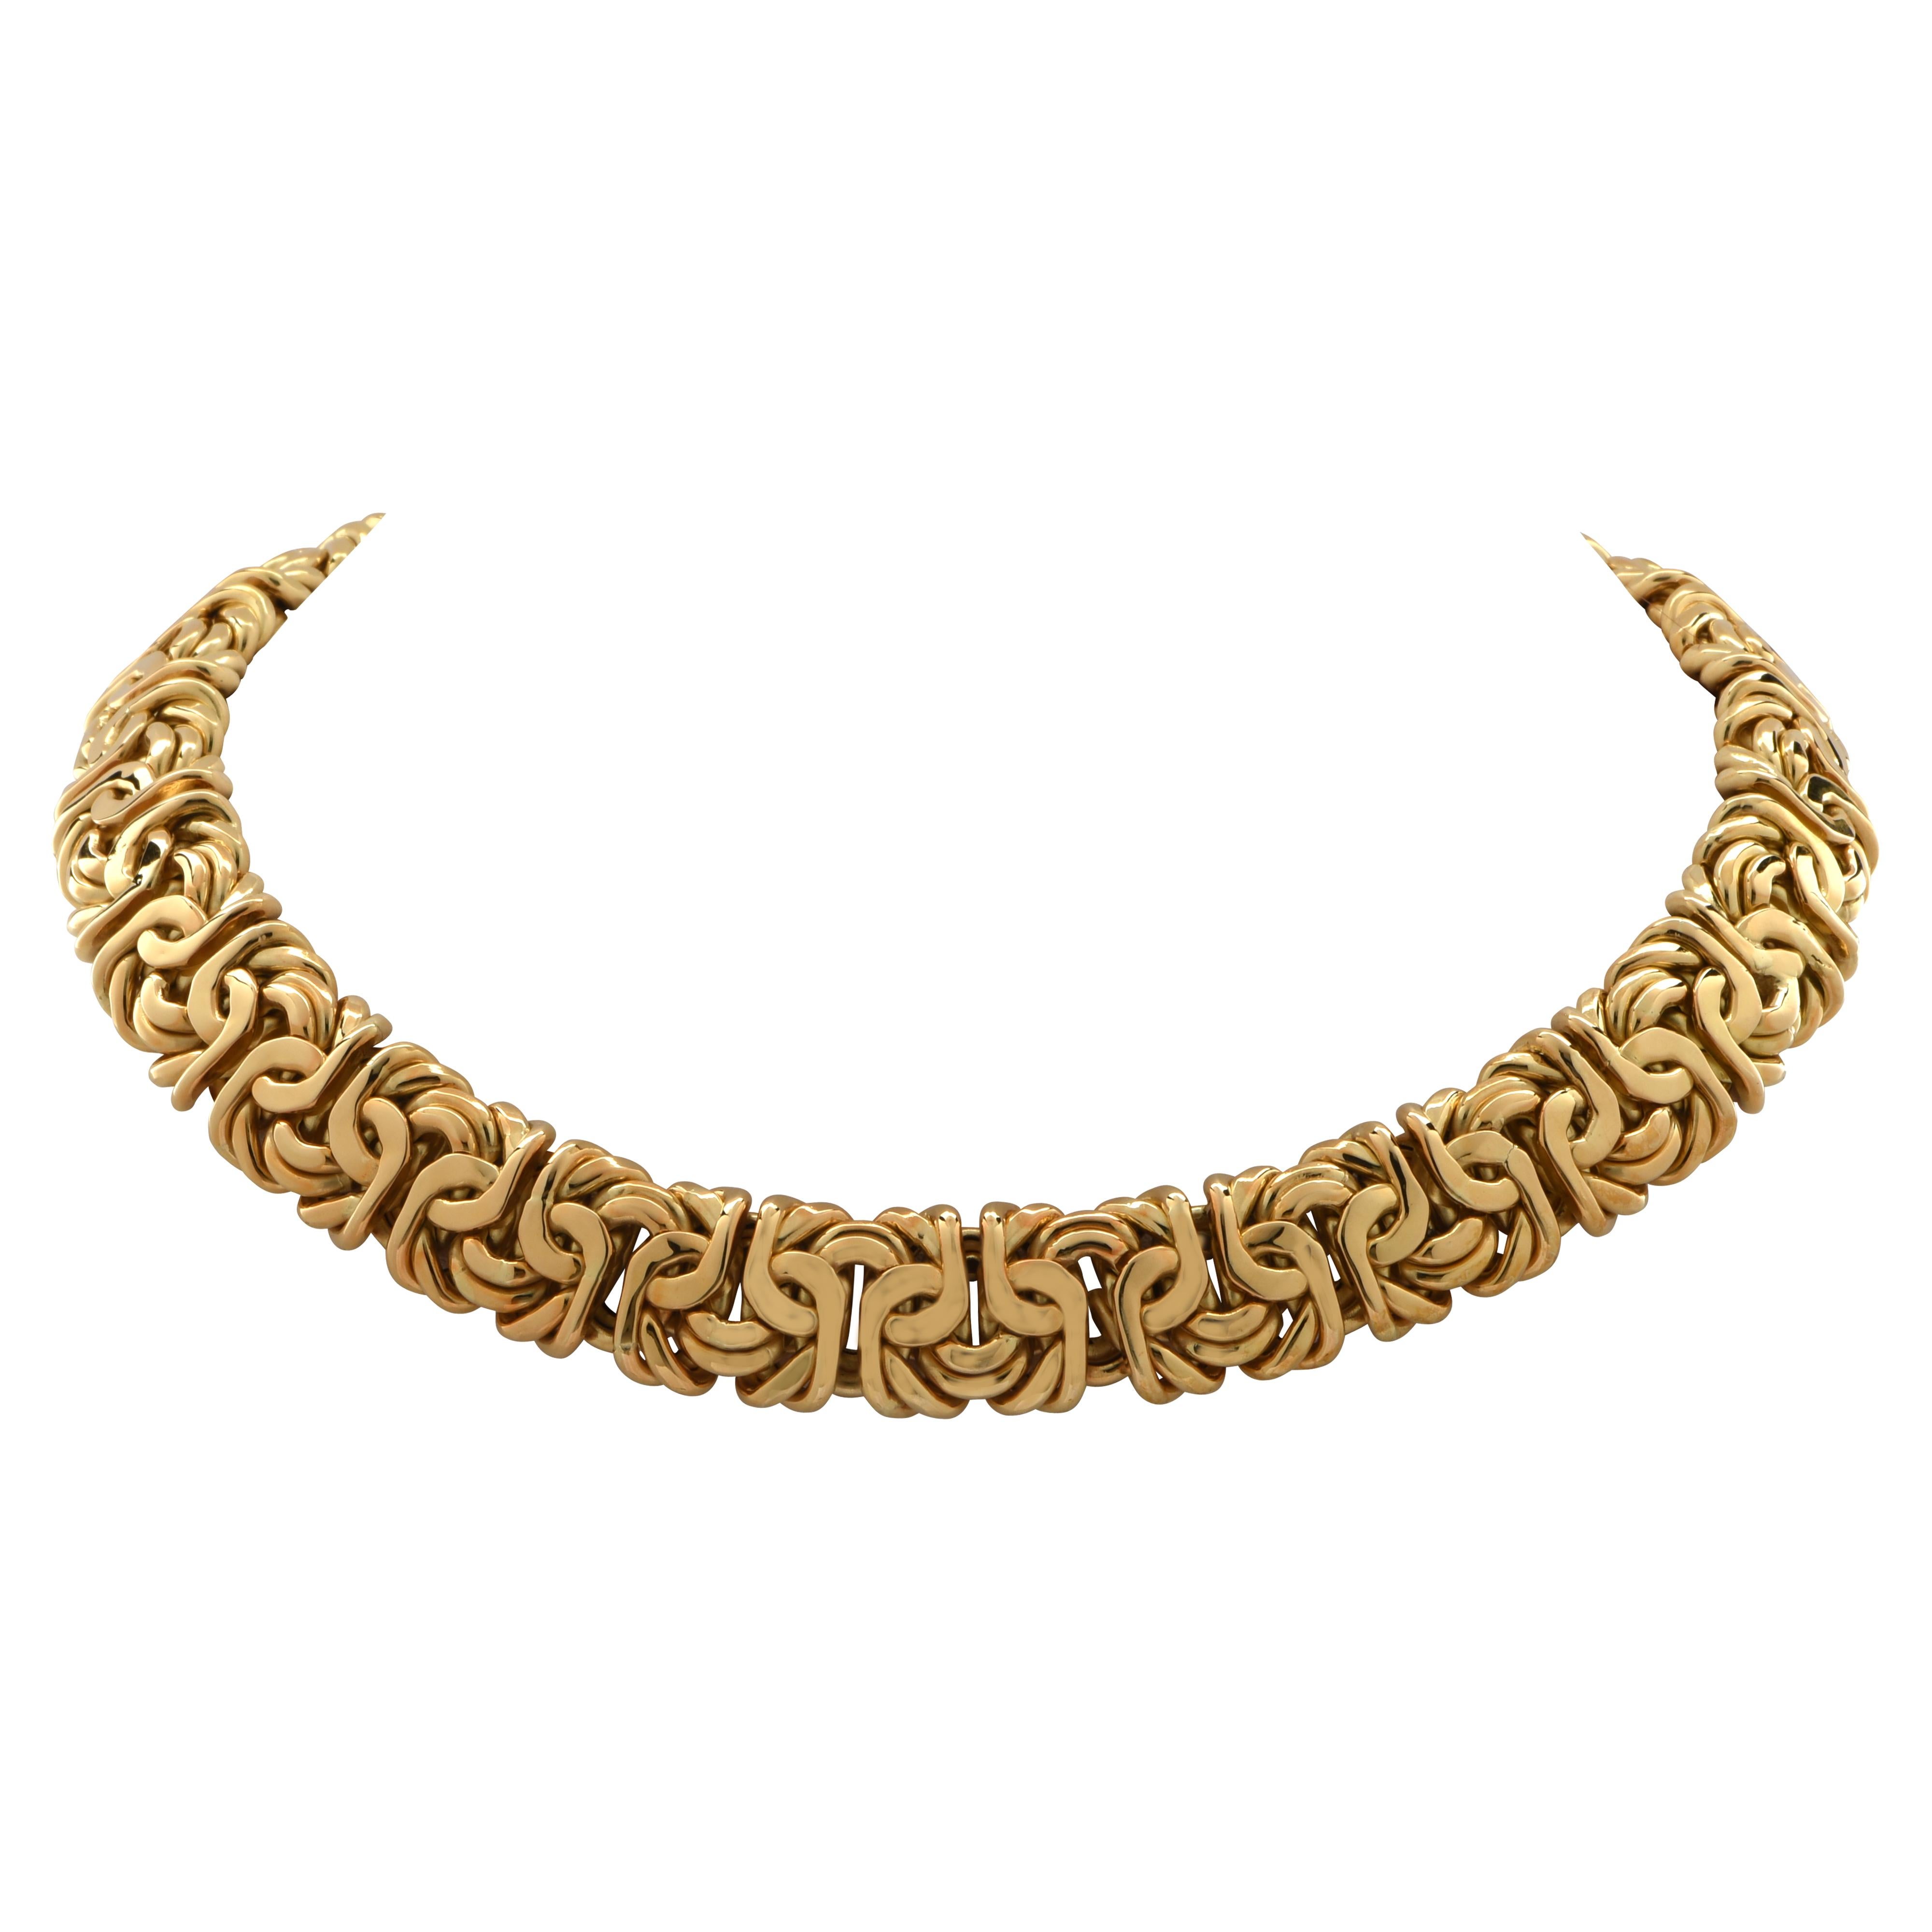 Striking necklace crafted in 18 Karat Yellow Gold. This bold statement piece measures 17 mm in width and 17 inches in length, and weighs 144.3 grams. The links twirl and interweave as they wrap luxuriously around your neck. This necklace closes with